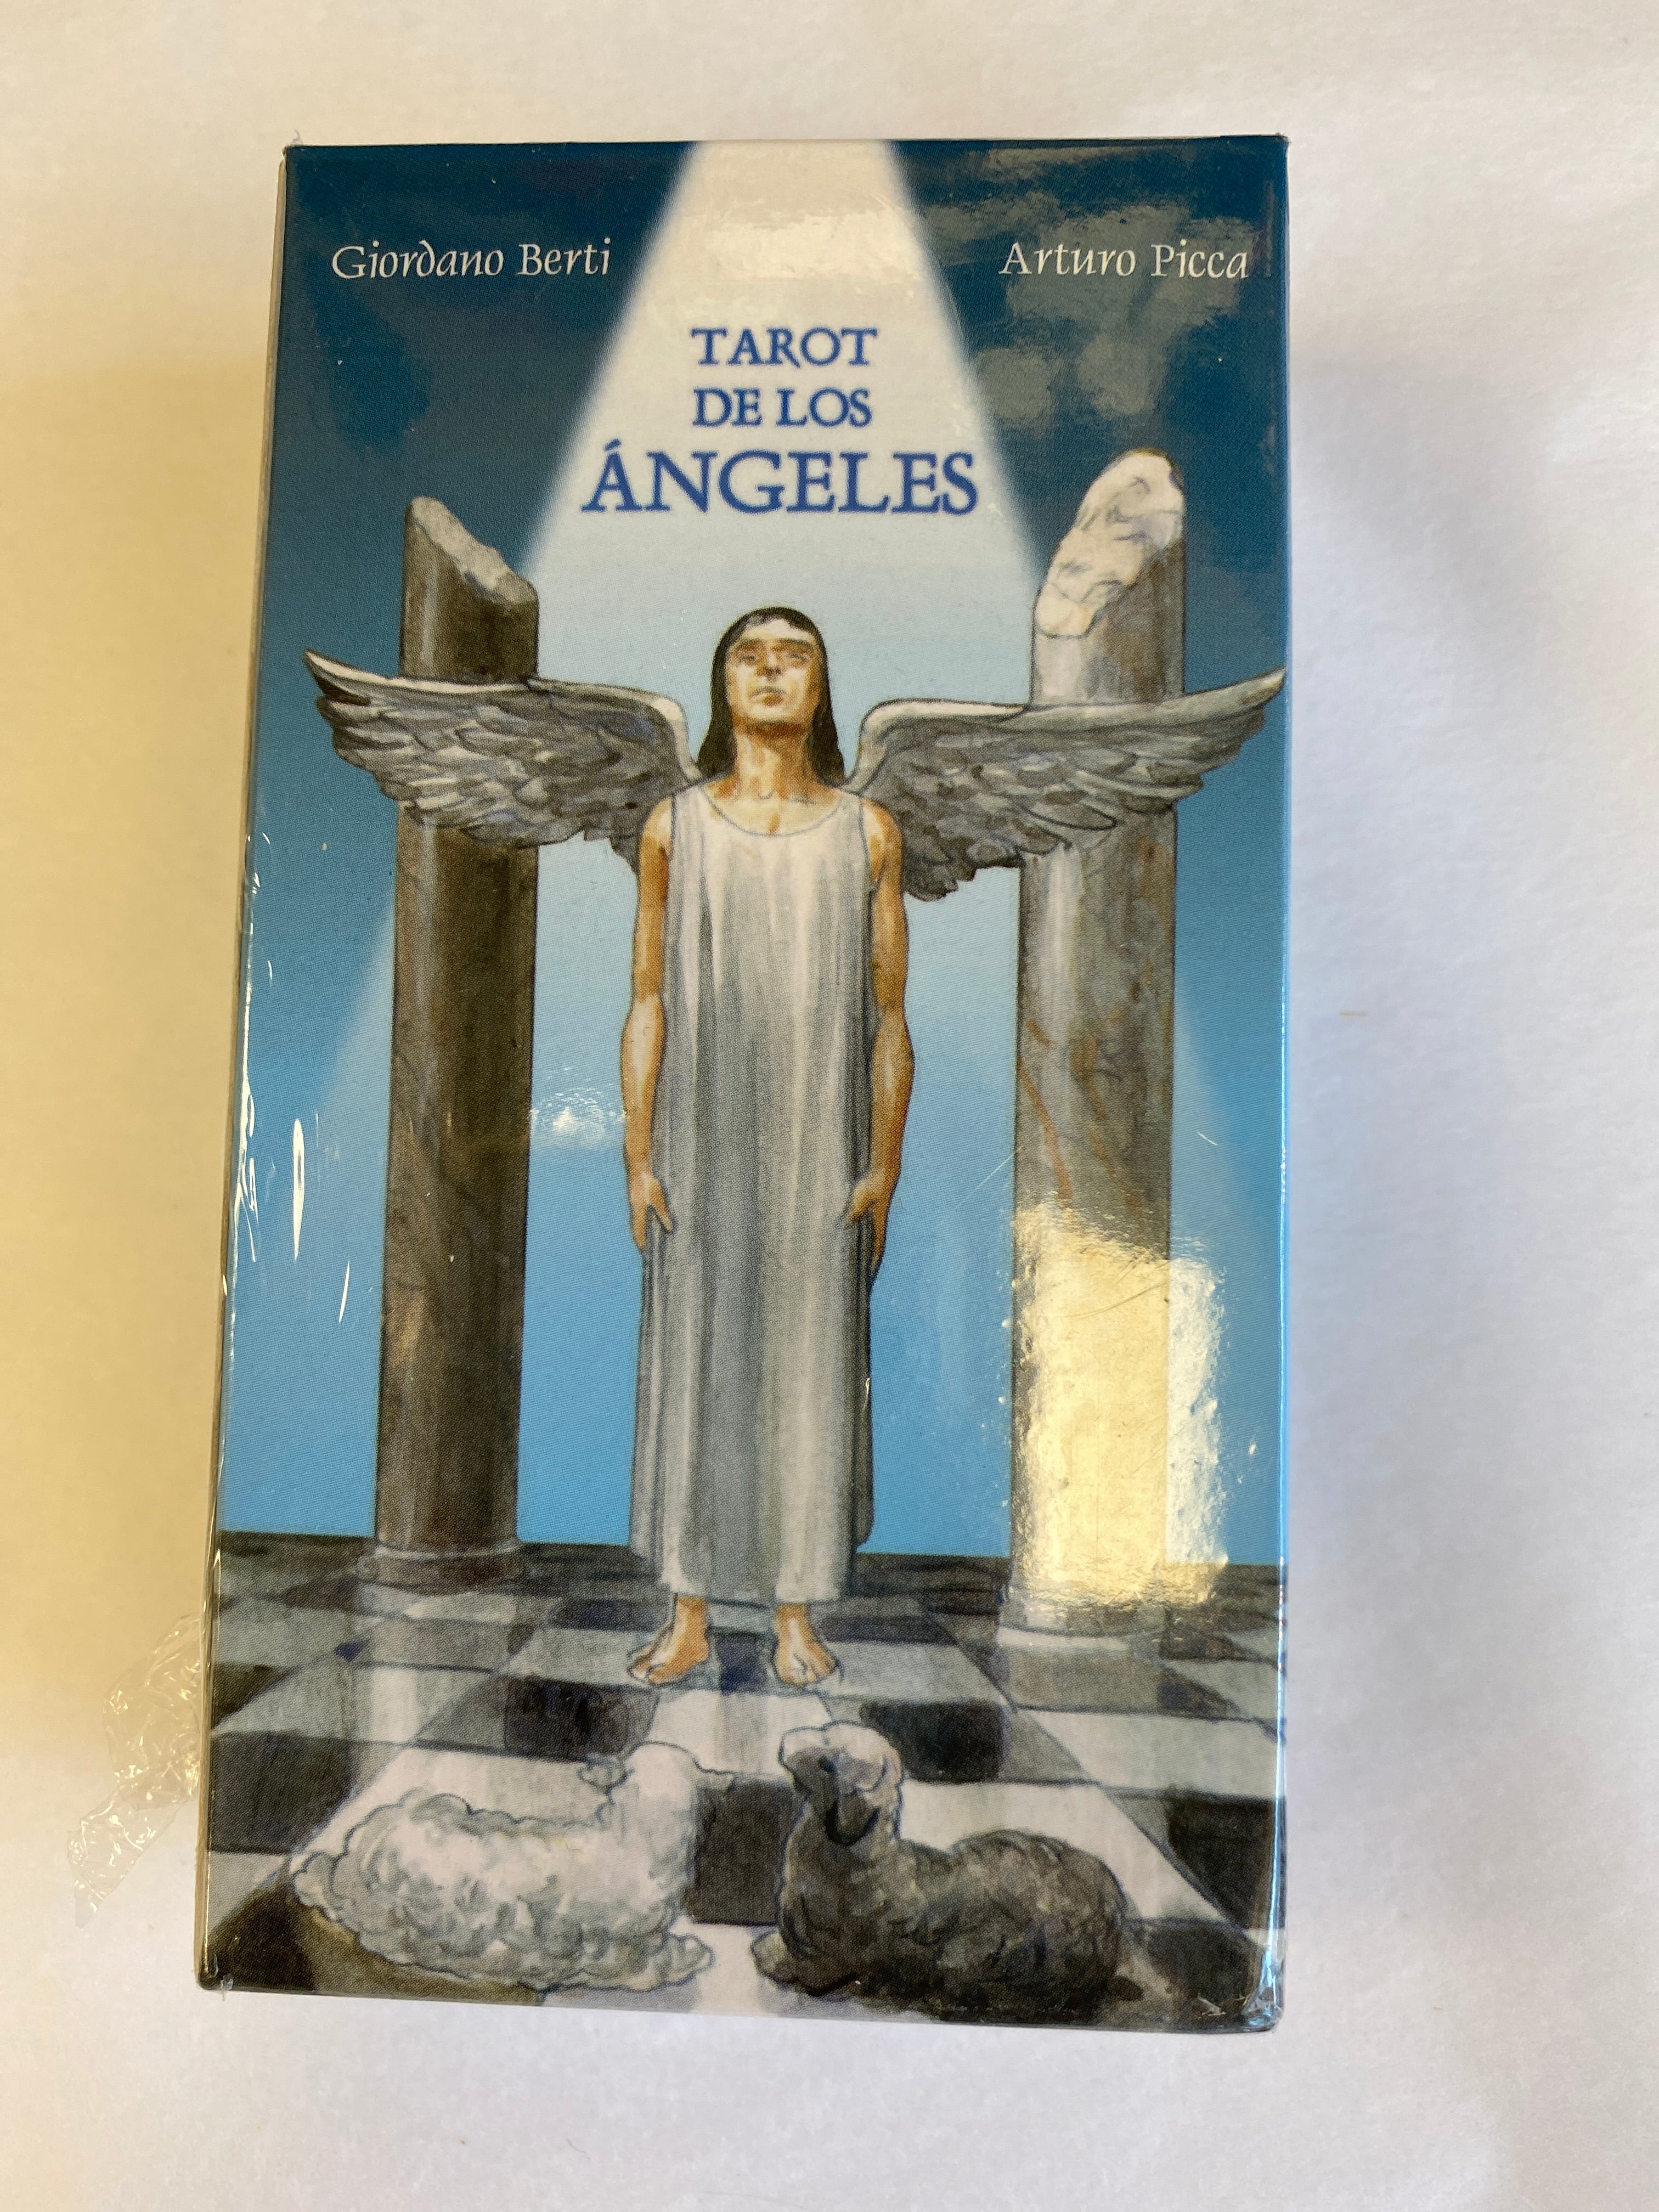 Tarot of the Angels